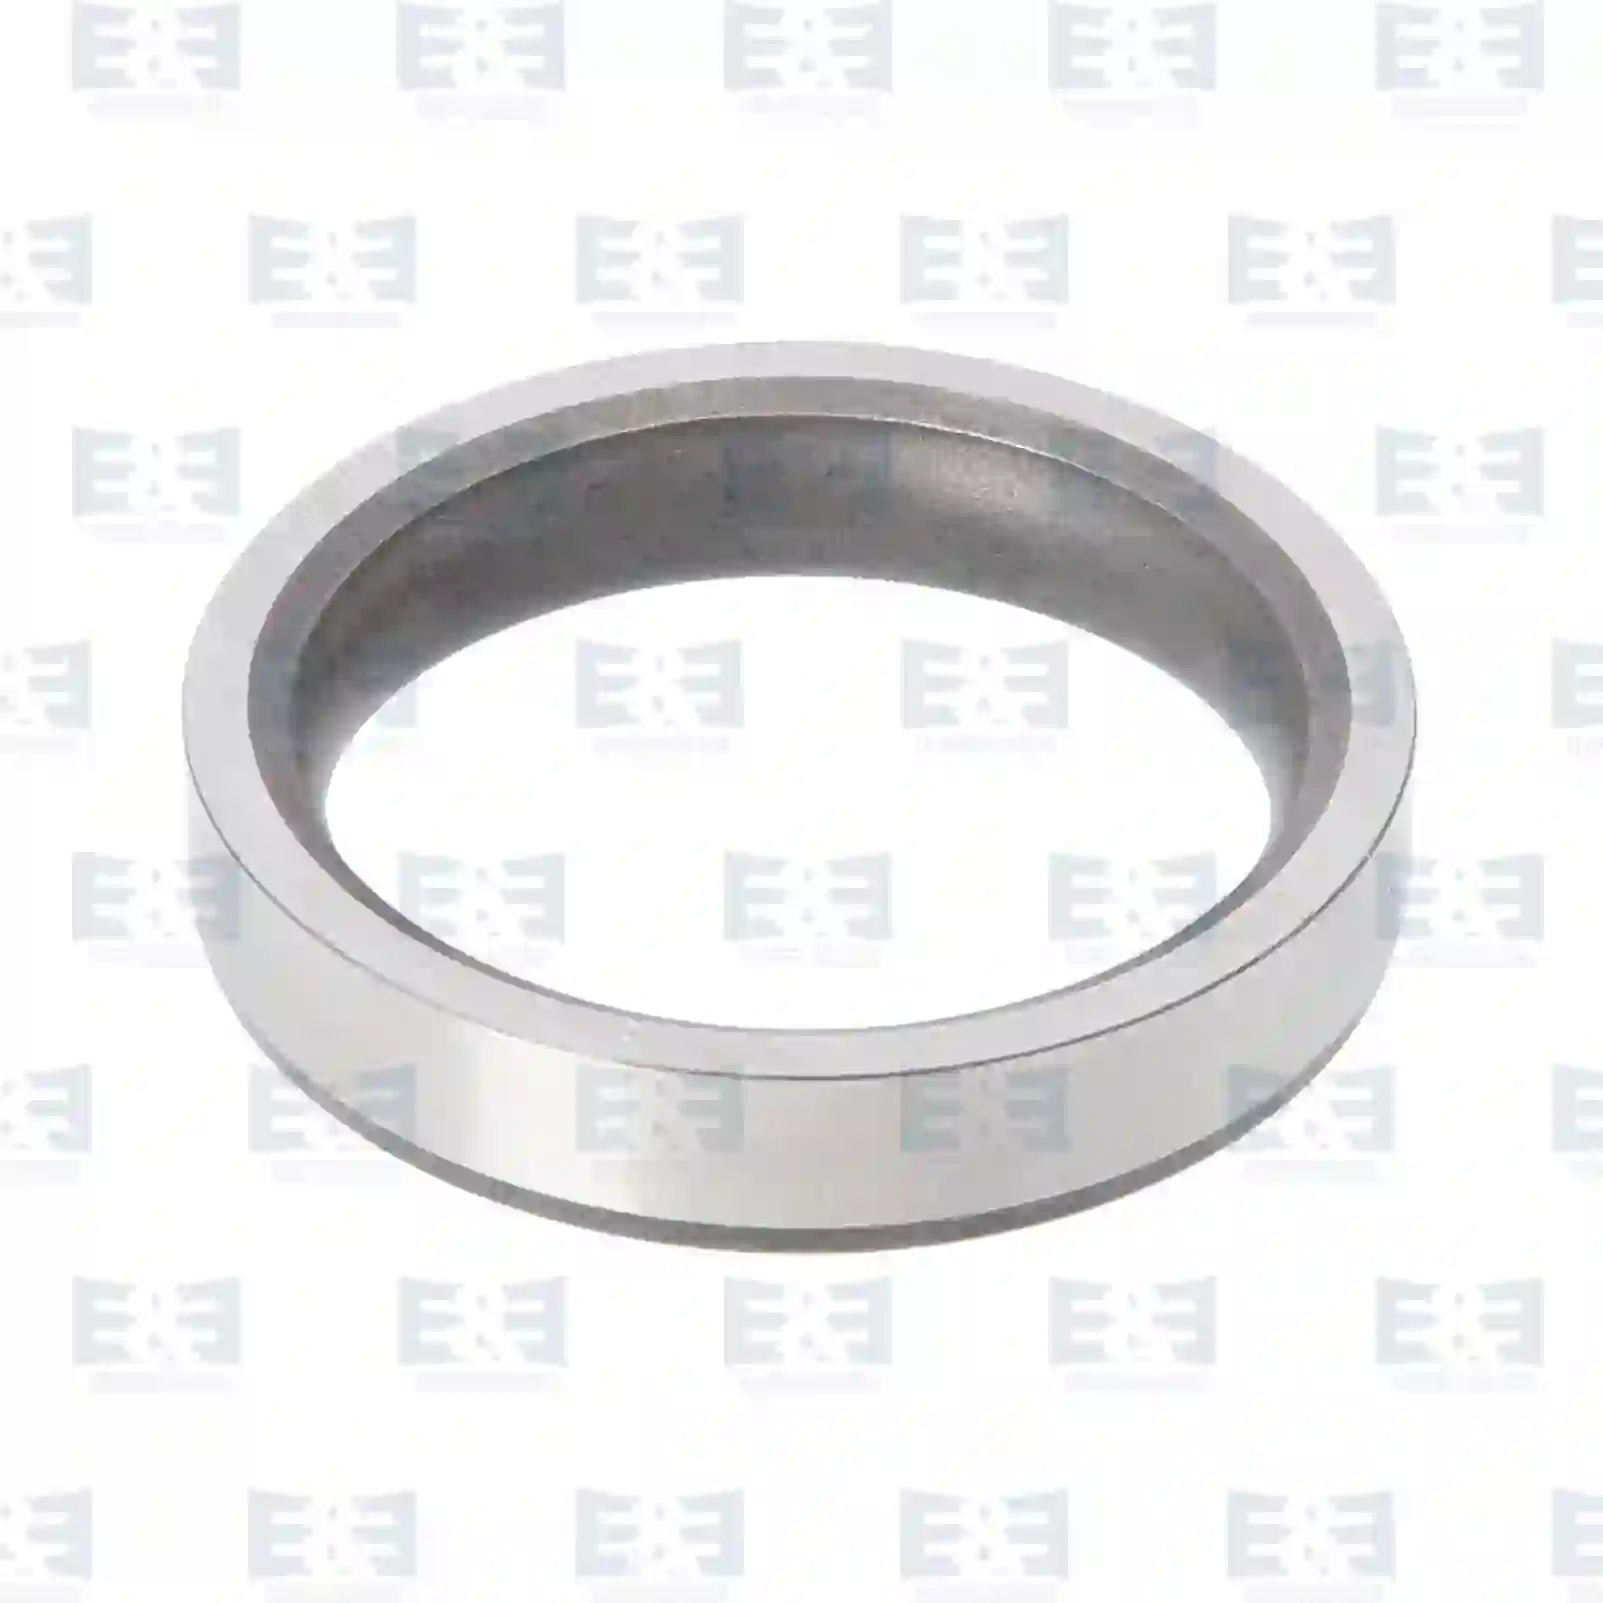  Cylinder Head Valve seat ring, intake, EE No 2E2206946 ,  oem no:51032030365 E&E Truck Spare Parts | Truck Spare Parts, Auotomotive Spare Parts